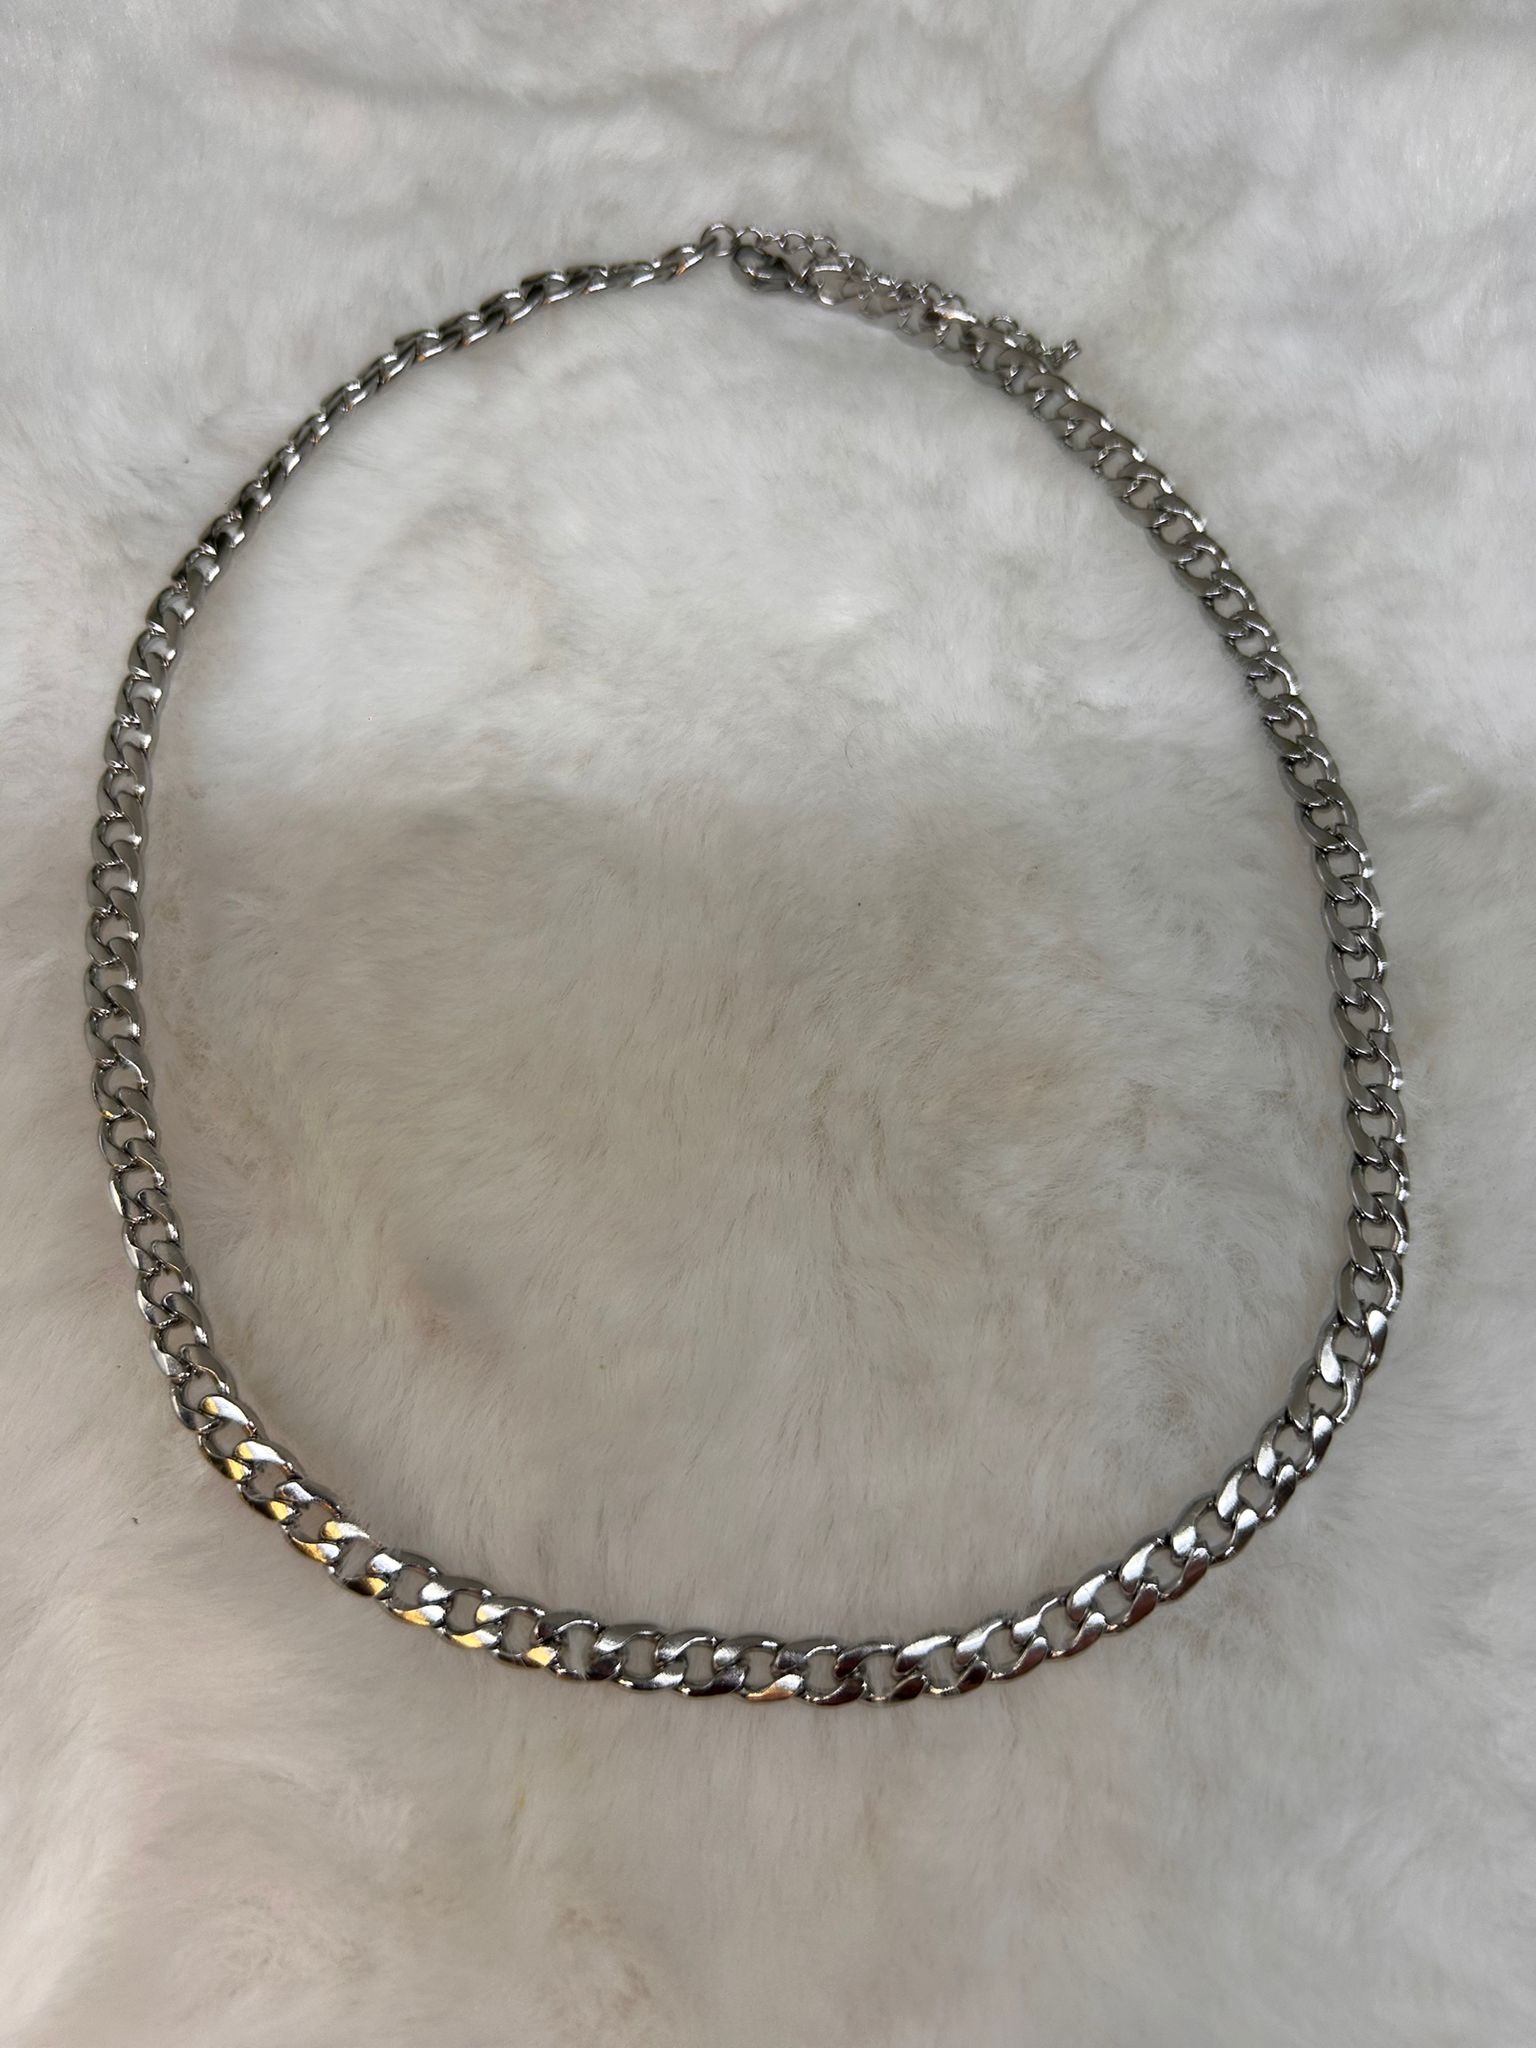 Shaping Brilliance: The Beauty of Aluminum Chains in Handcrafted Jewelry